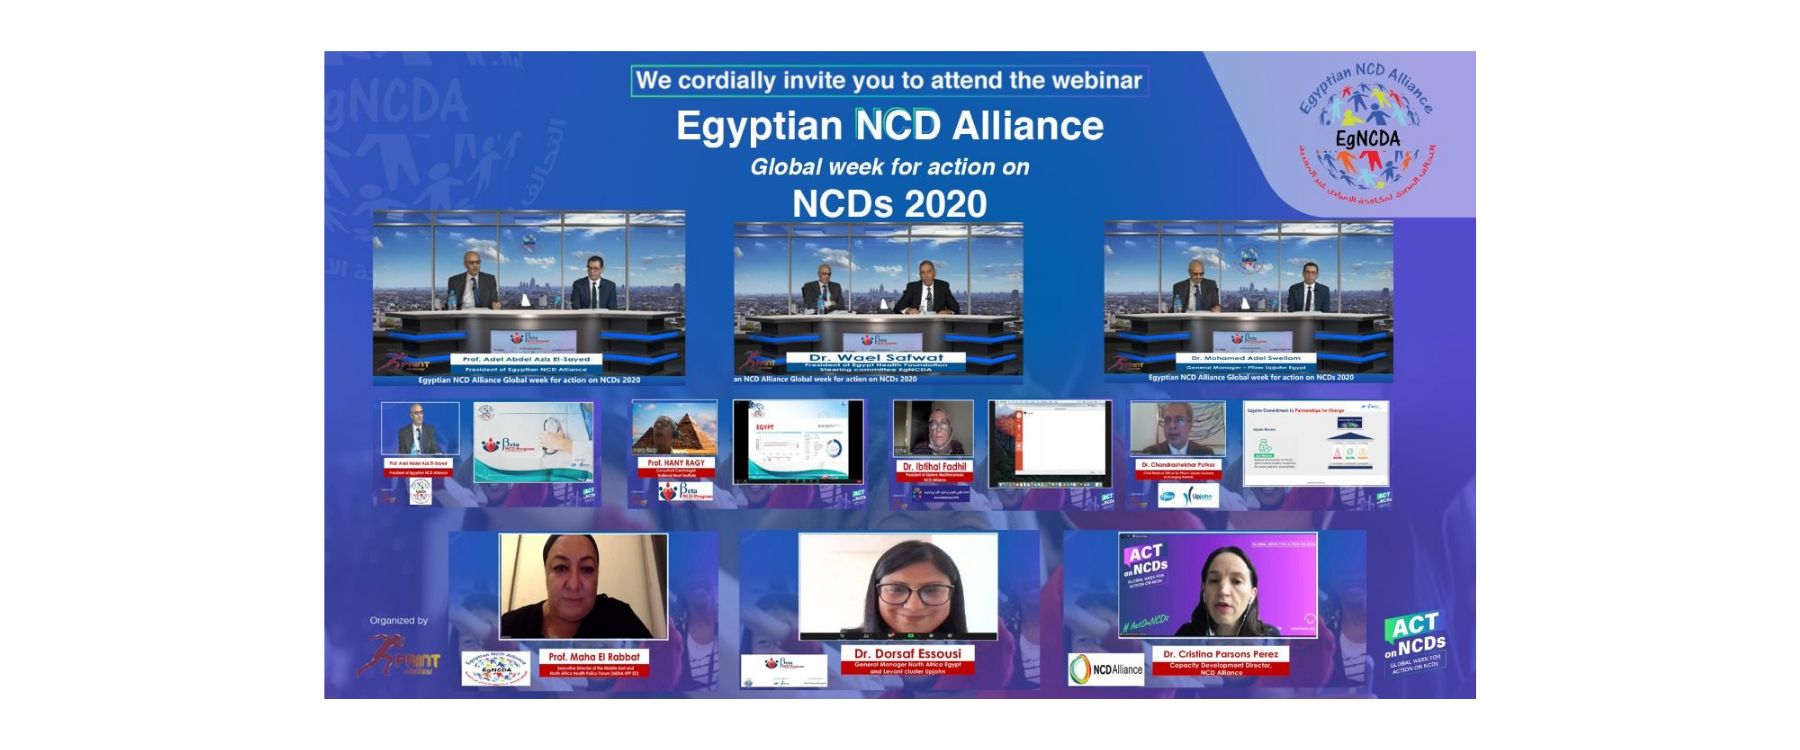 The Egyptian NCD alliance is bridging the accountability gap for progress on NCDs